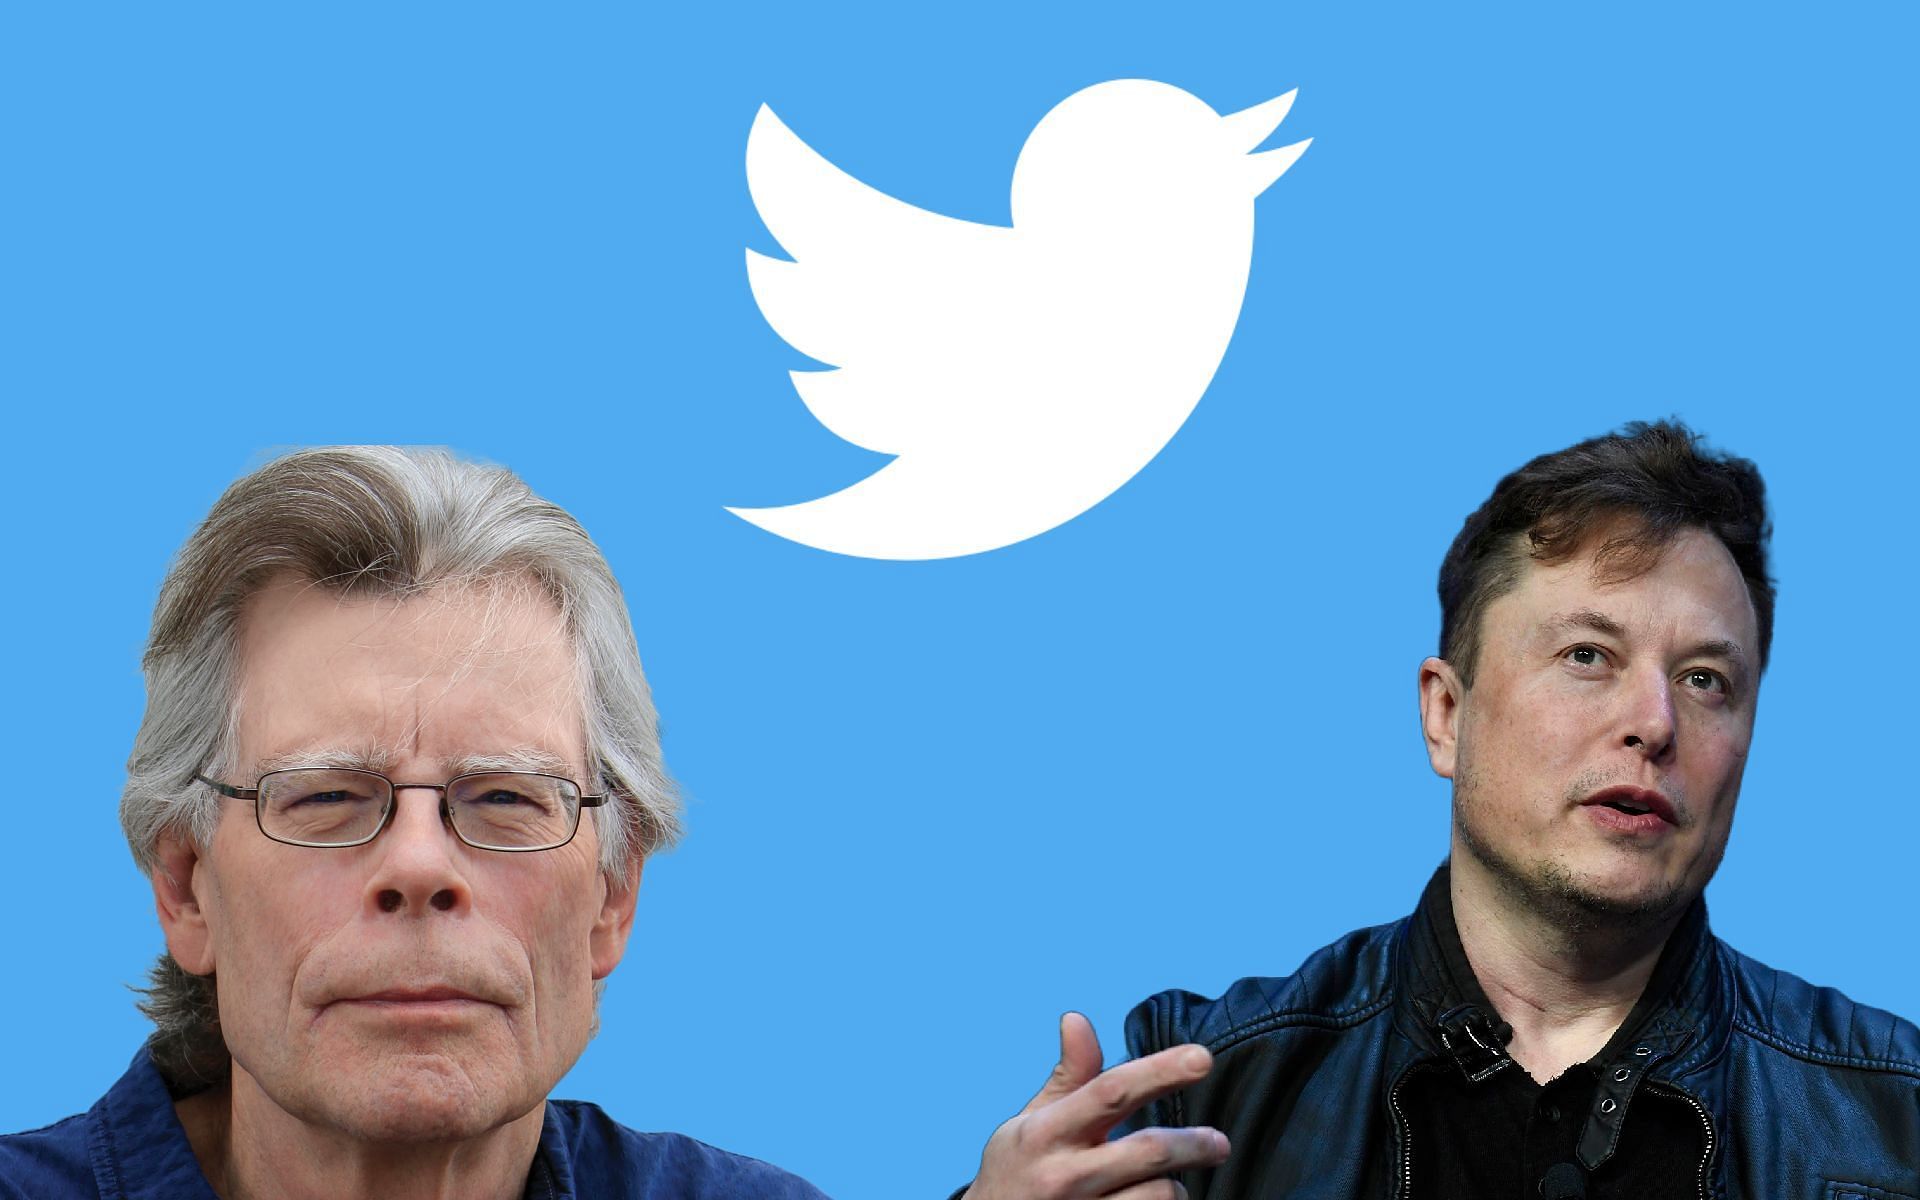 Stephen King calls out Elon Musk and Twitter over a recent controversial change (Image via Sportskeeda)